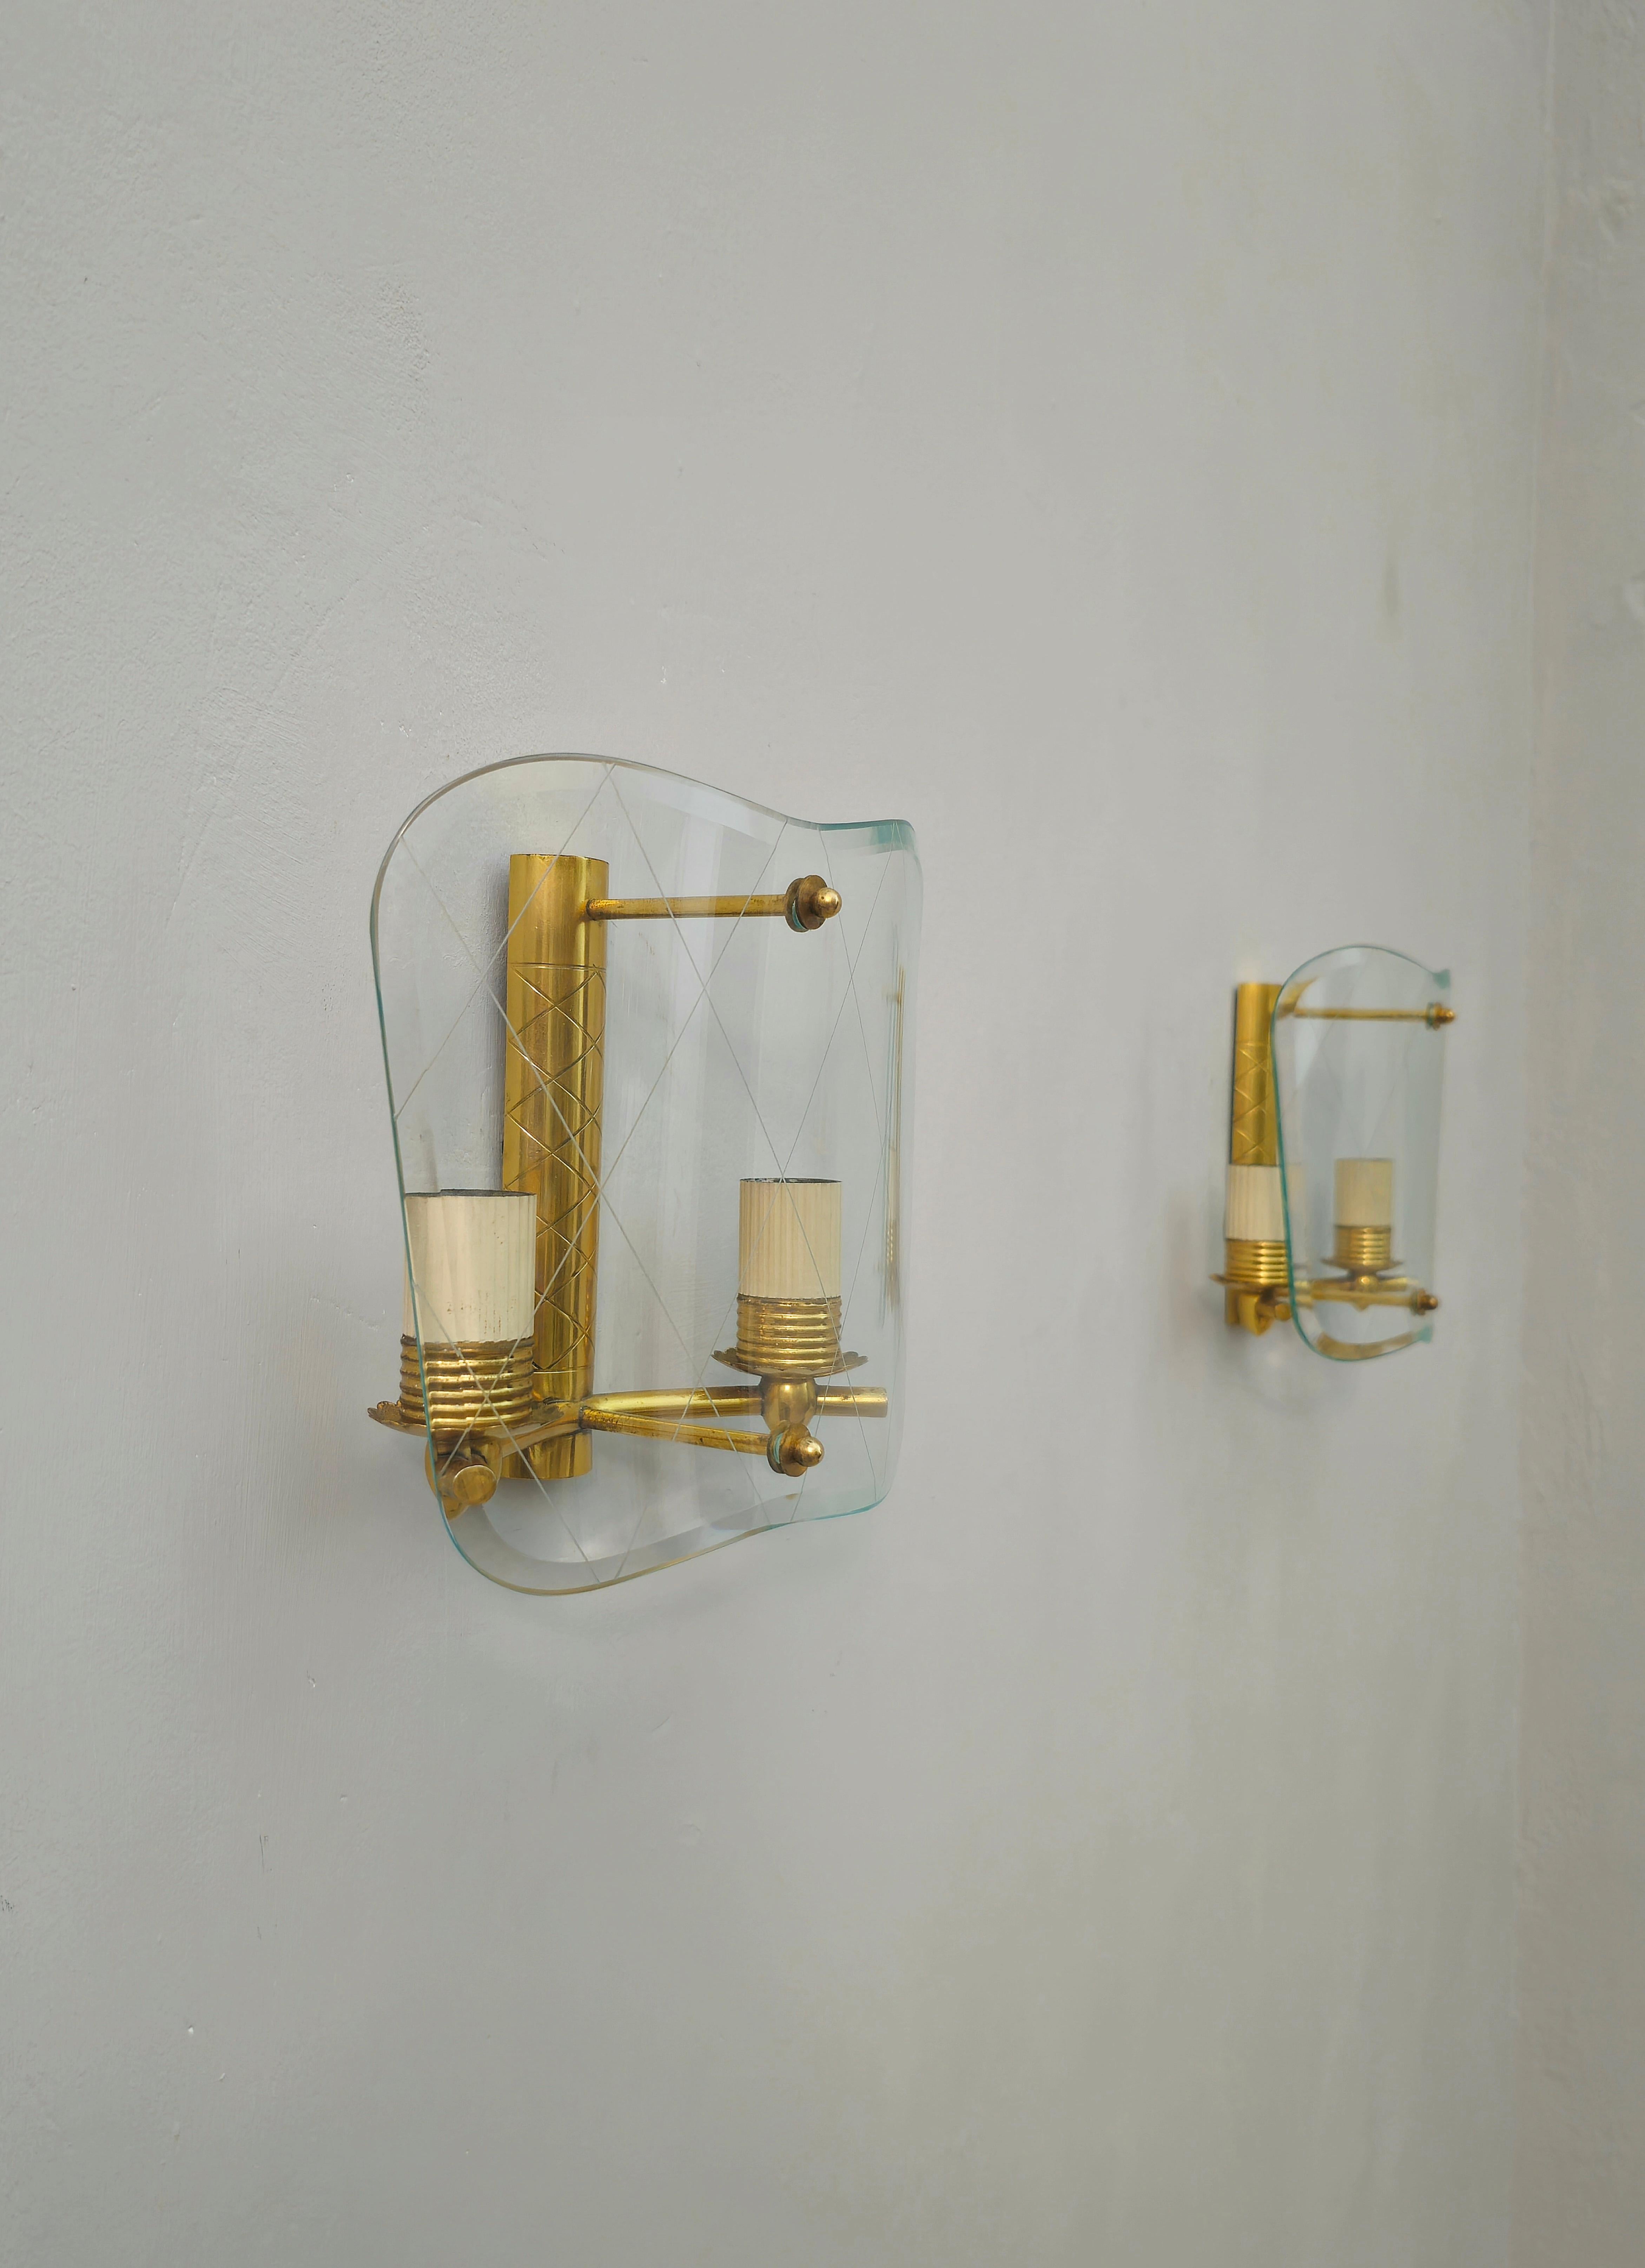 3 Wall Lights Sconces Brass Decorated Glass Midcentury Italian Design 1950 For Sale 12